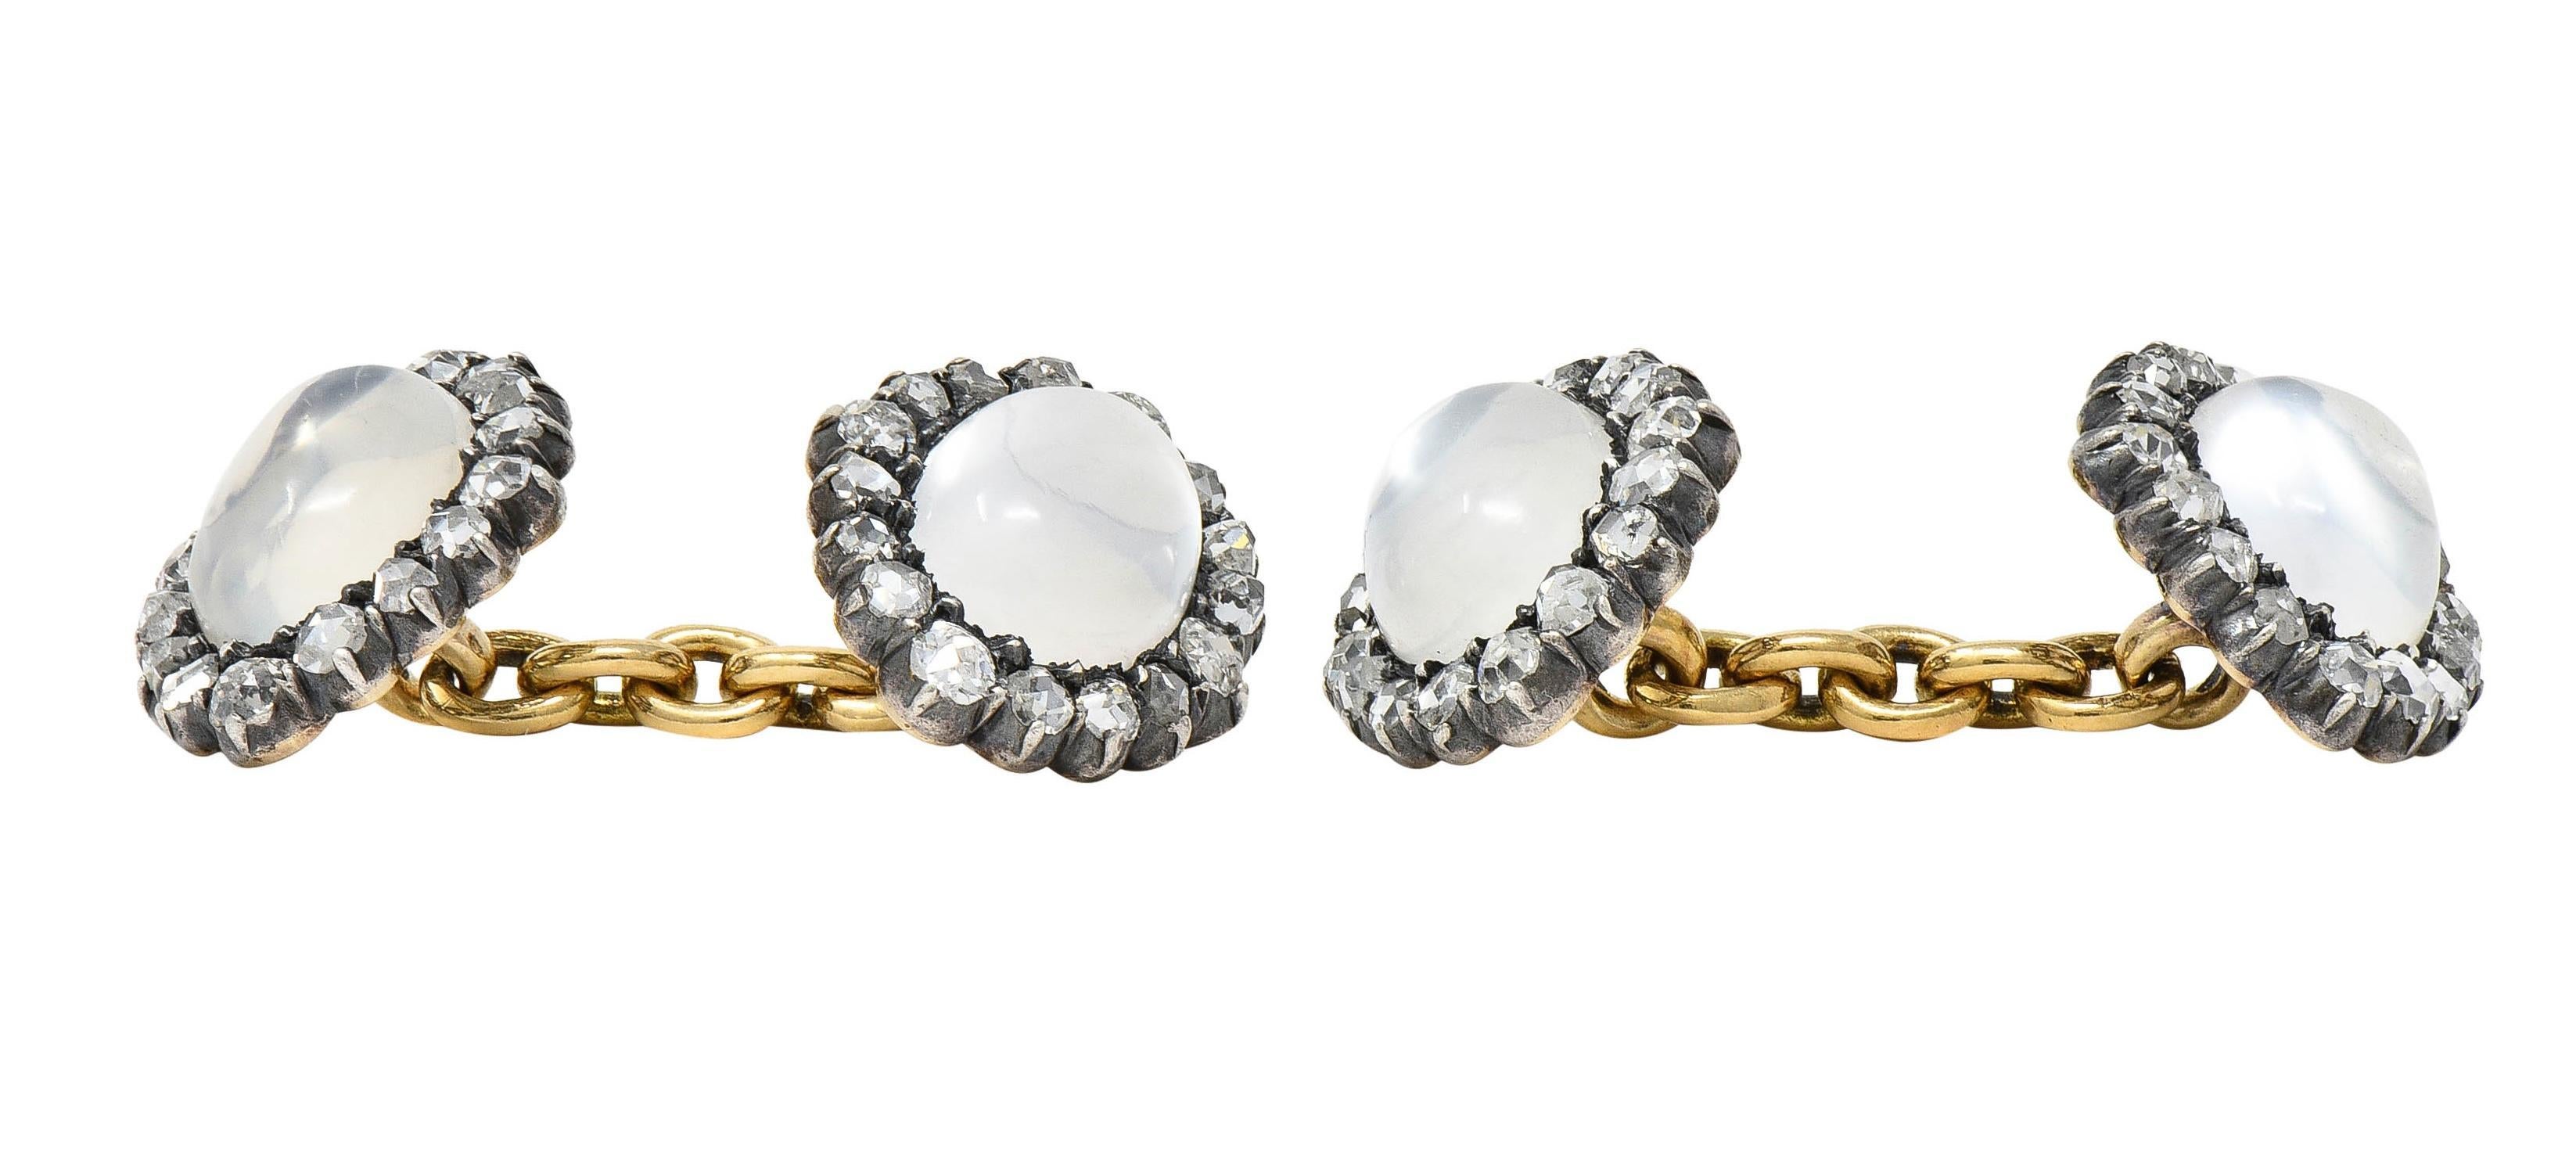 Victorian 1.44 CTW Diamond Moonstone 14 Karat Gold Silver Antique Cufflinks In Excellent Condition For Sale In Philadelphia, PA